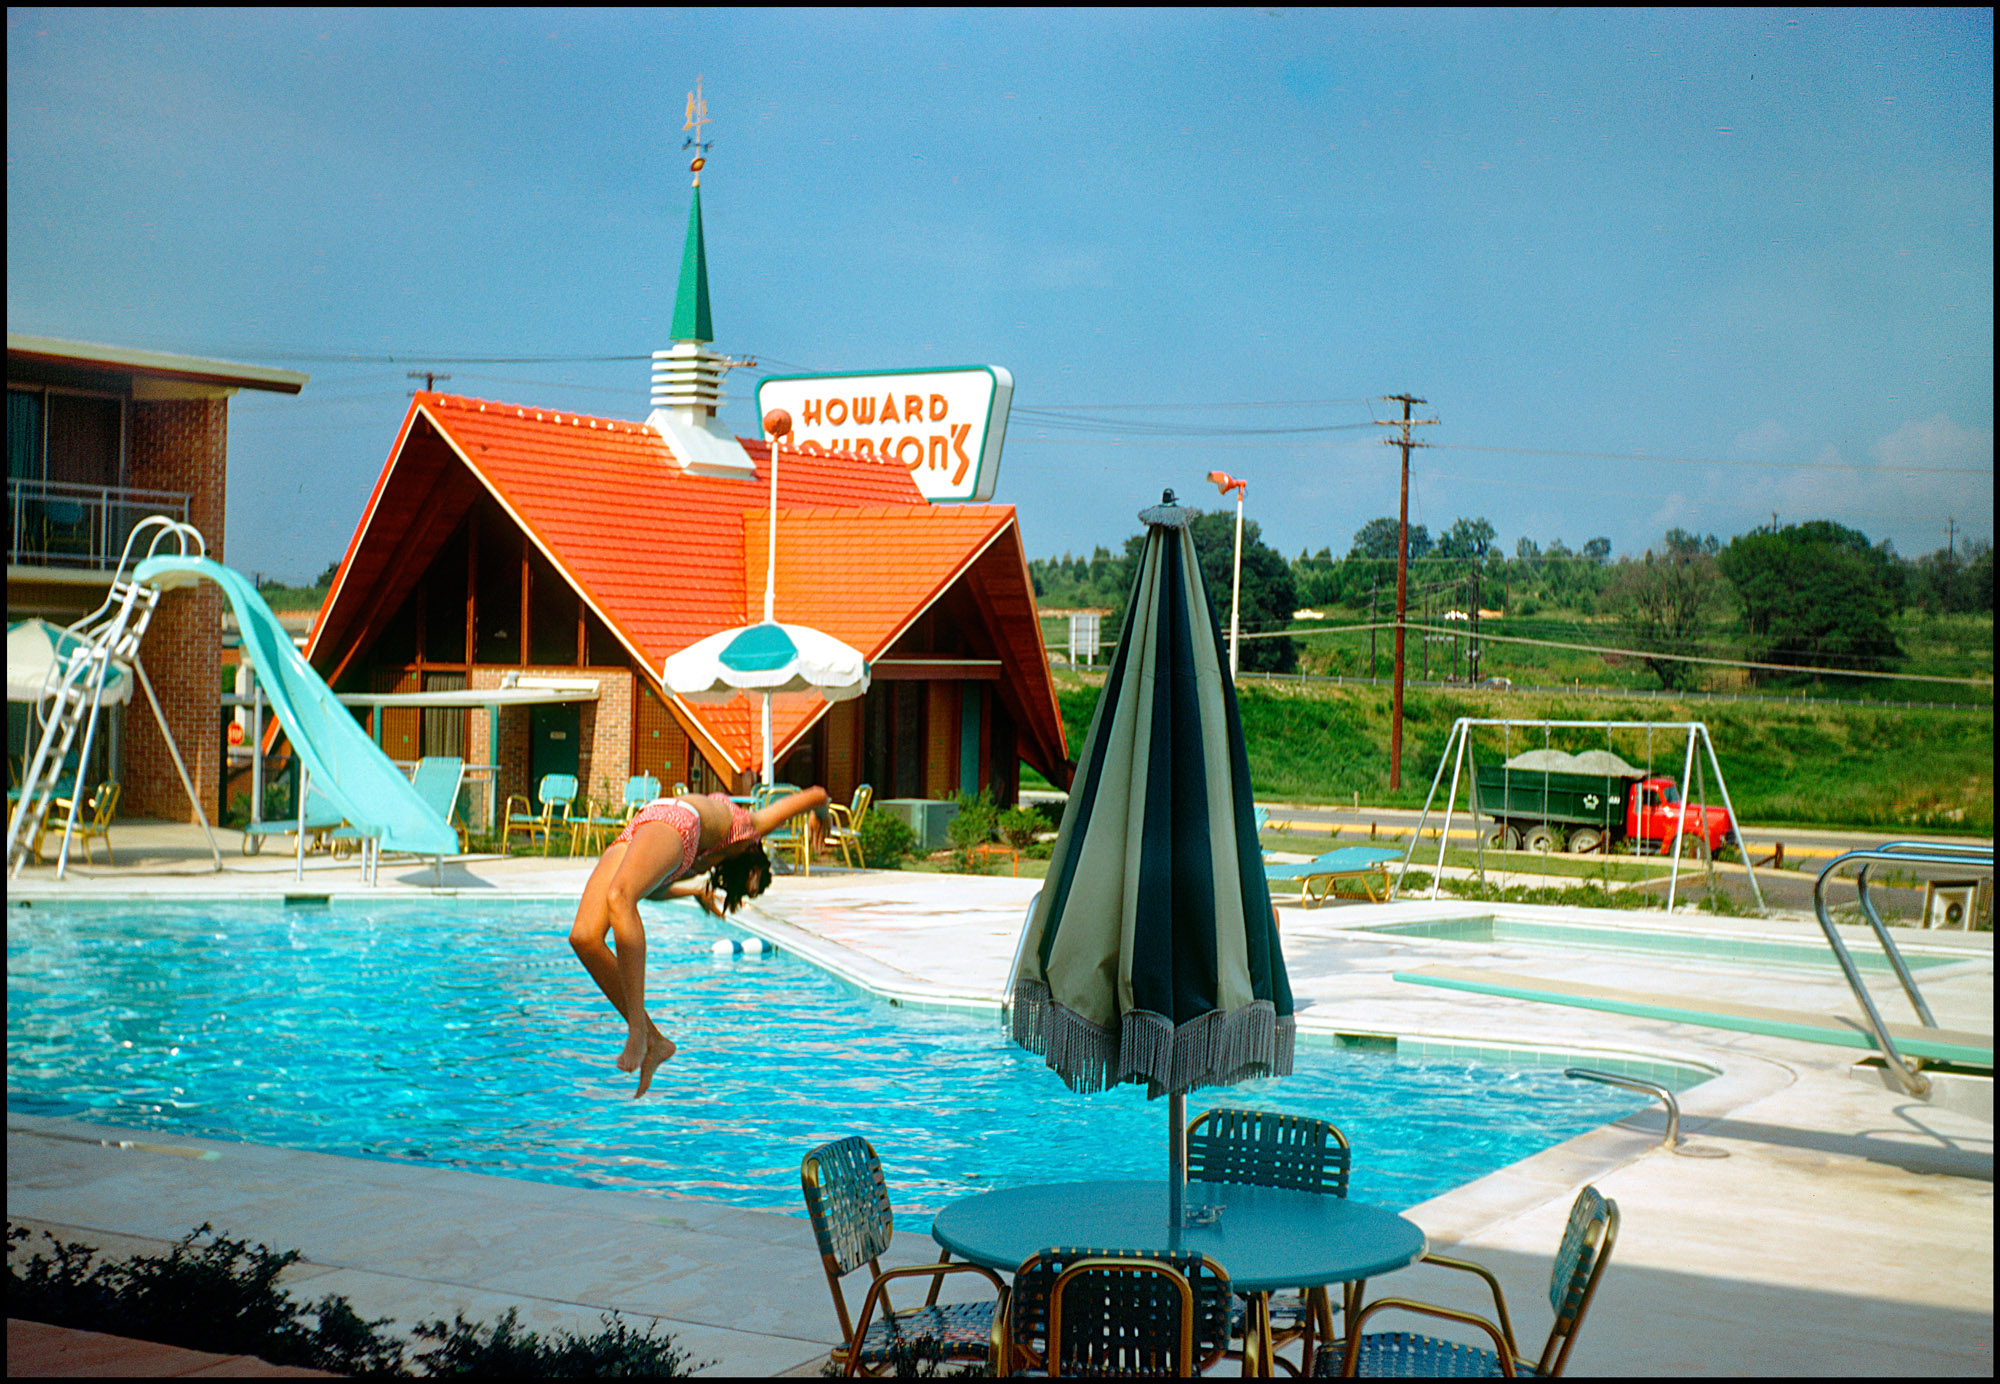 Poolside at a Howard Johnson's Motor Lodge in Austin, Texas, 1967. 35mm Kodachrome transparency by Hugh Mason Ayer. View full size.